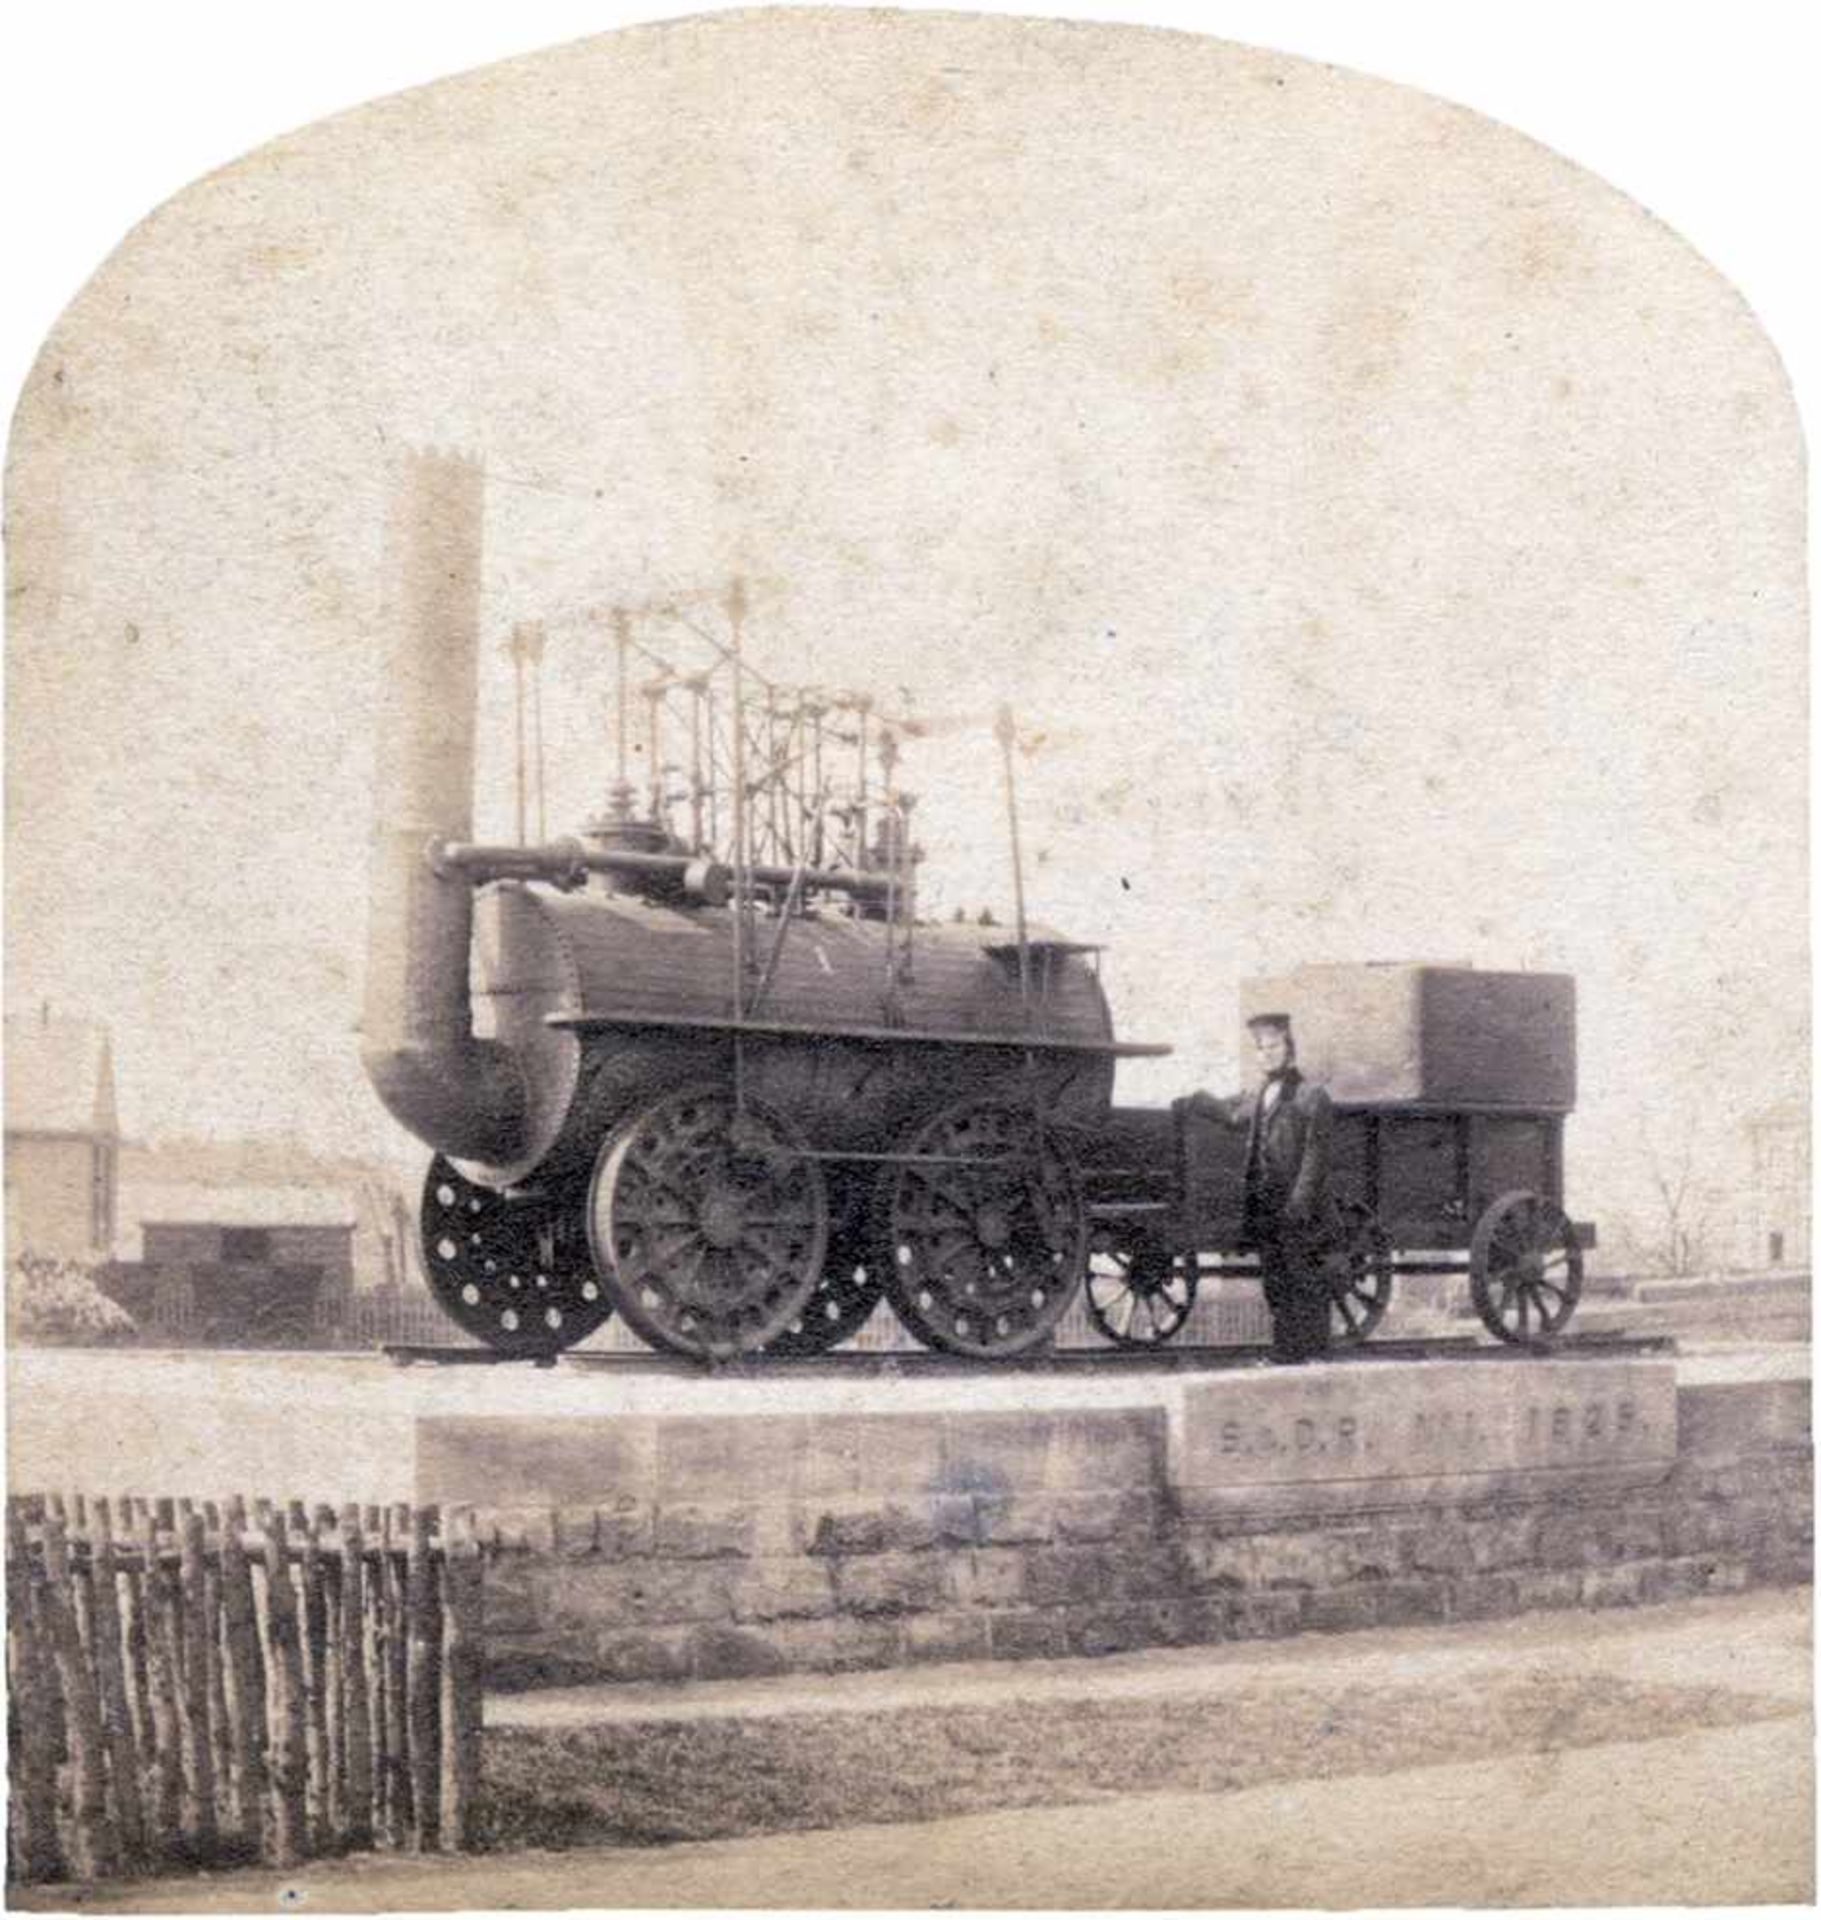 British Steam Railway Locomotive, Early: Locomotion No. 1 of 1825, constructed for the Stockton &